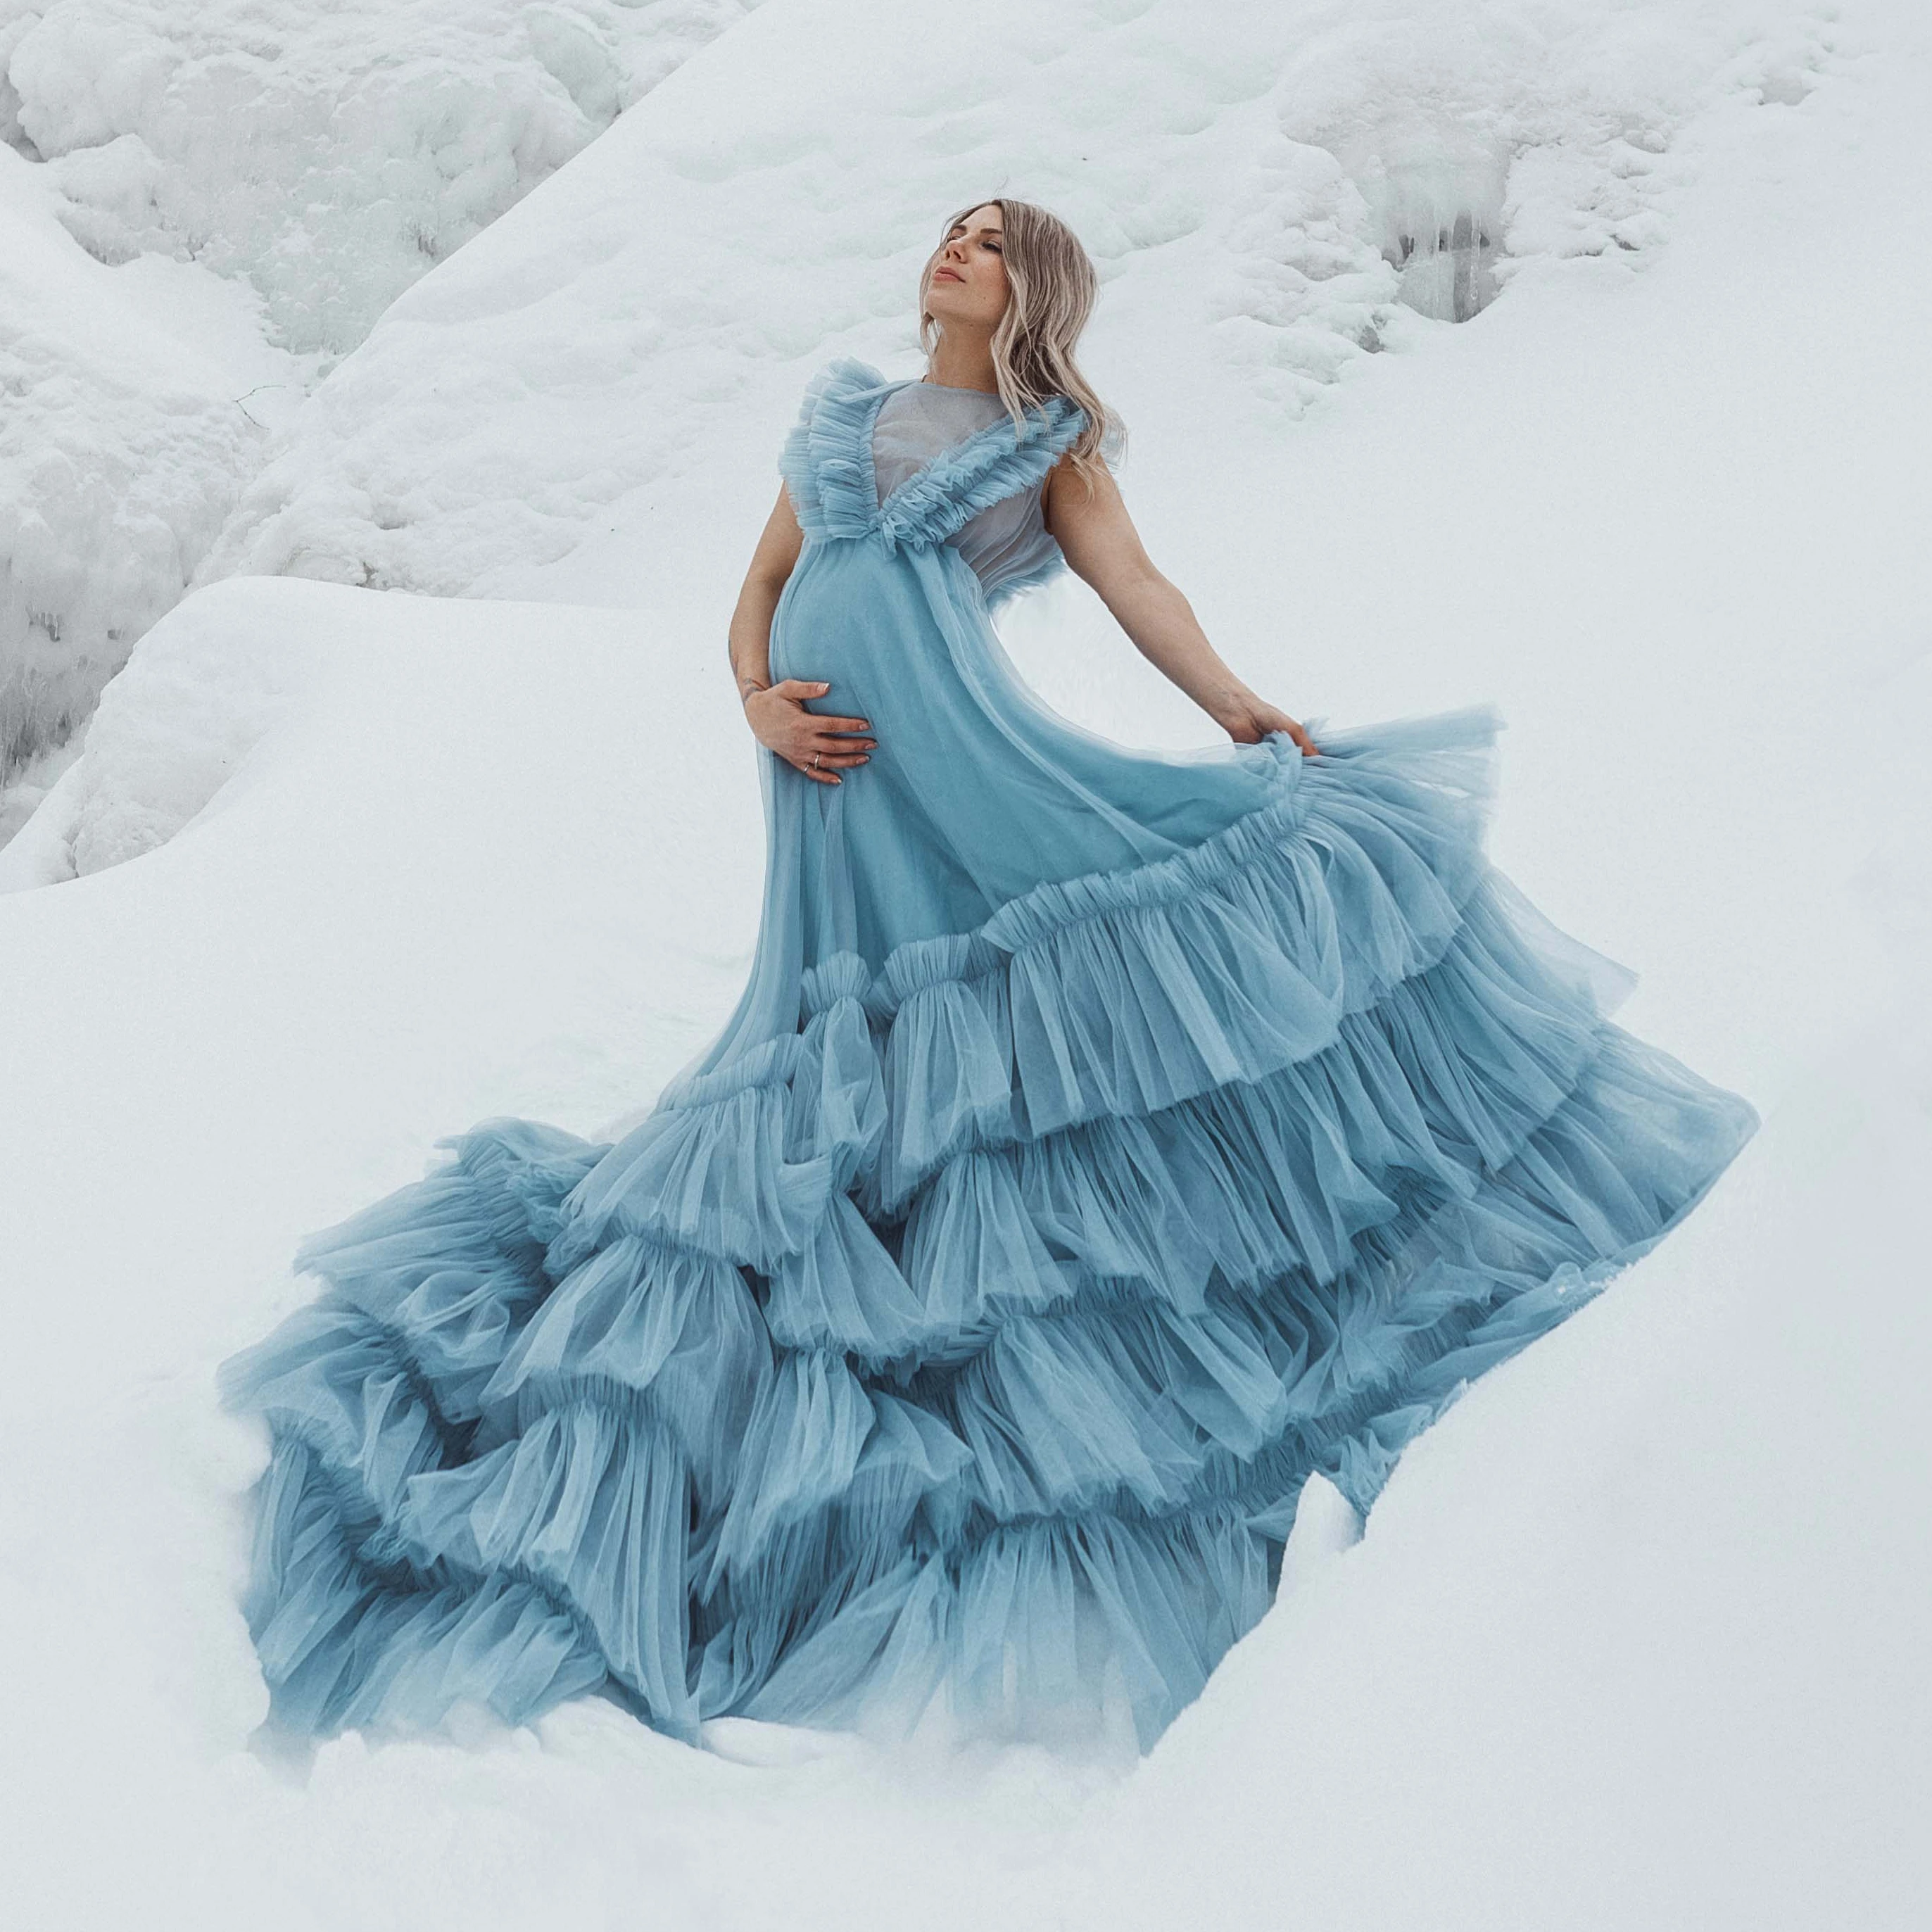 

Blue Tulle Ruffled Maternity Loose Dress for Photoshoot Winter Plus Size Pregnancy Robe Baby Shower Gown for Wedding Guest